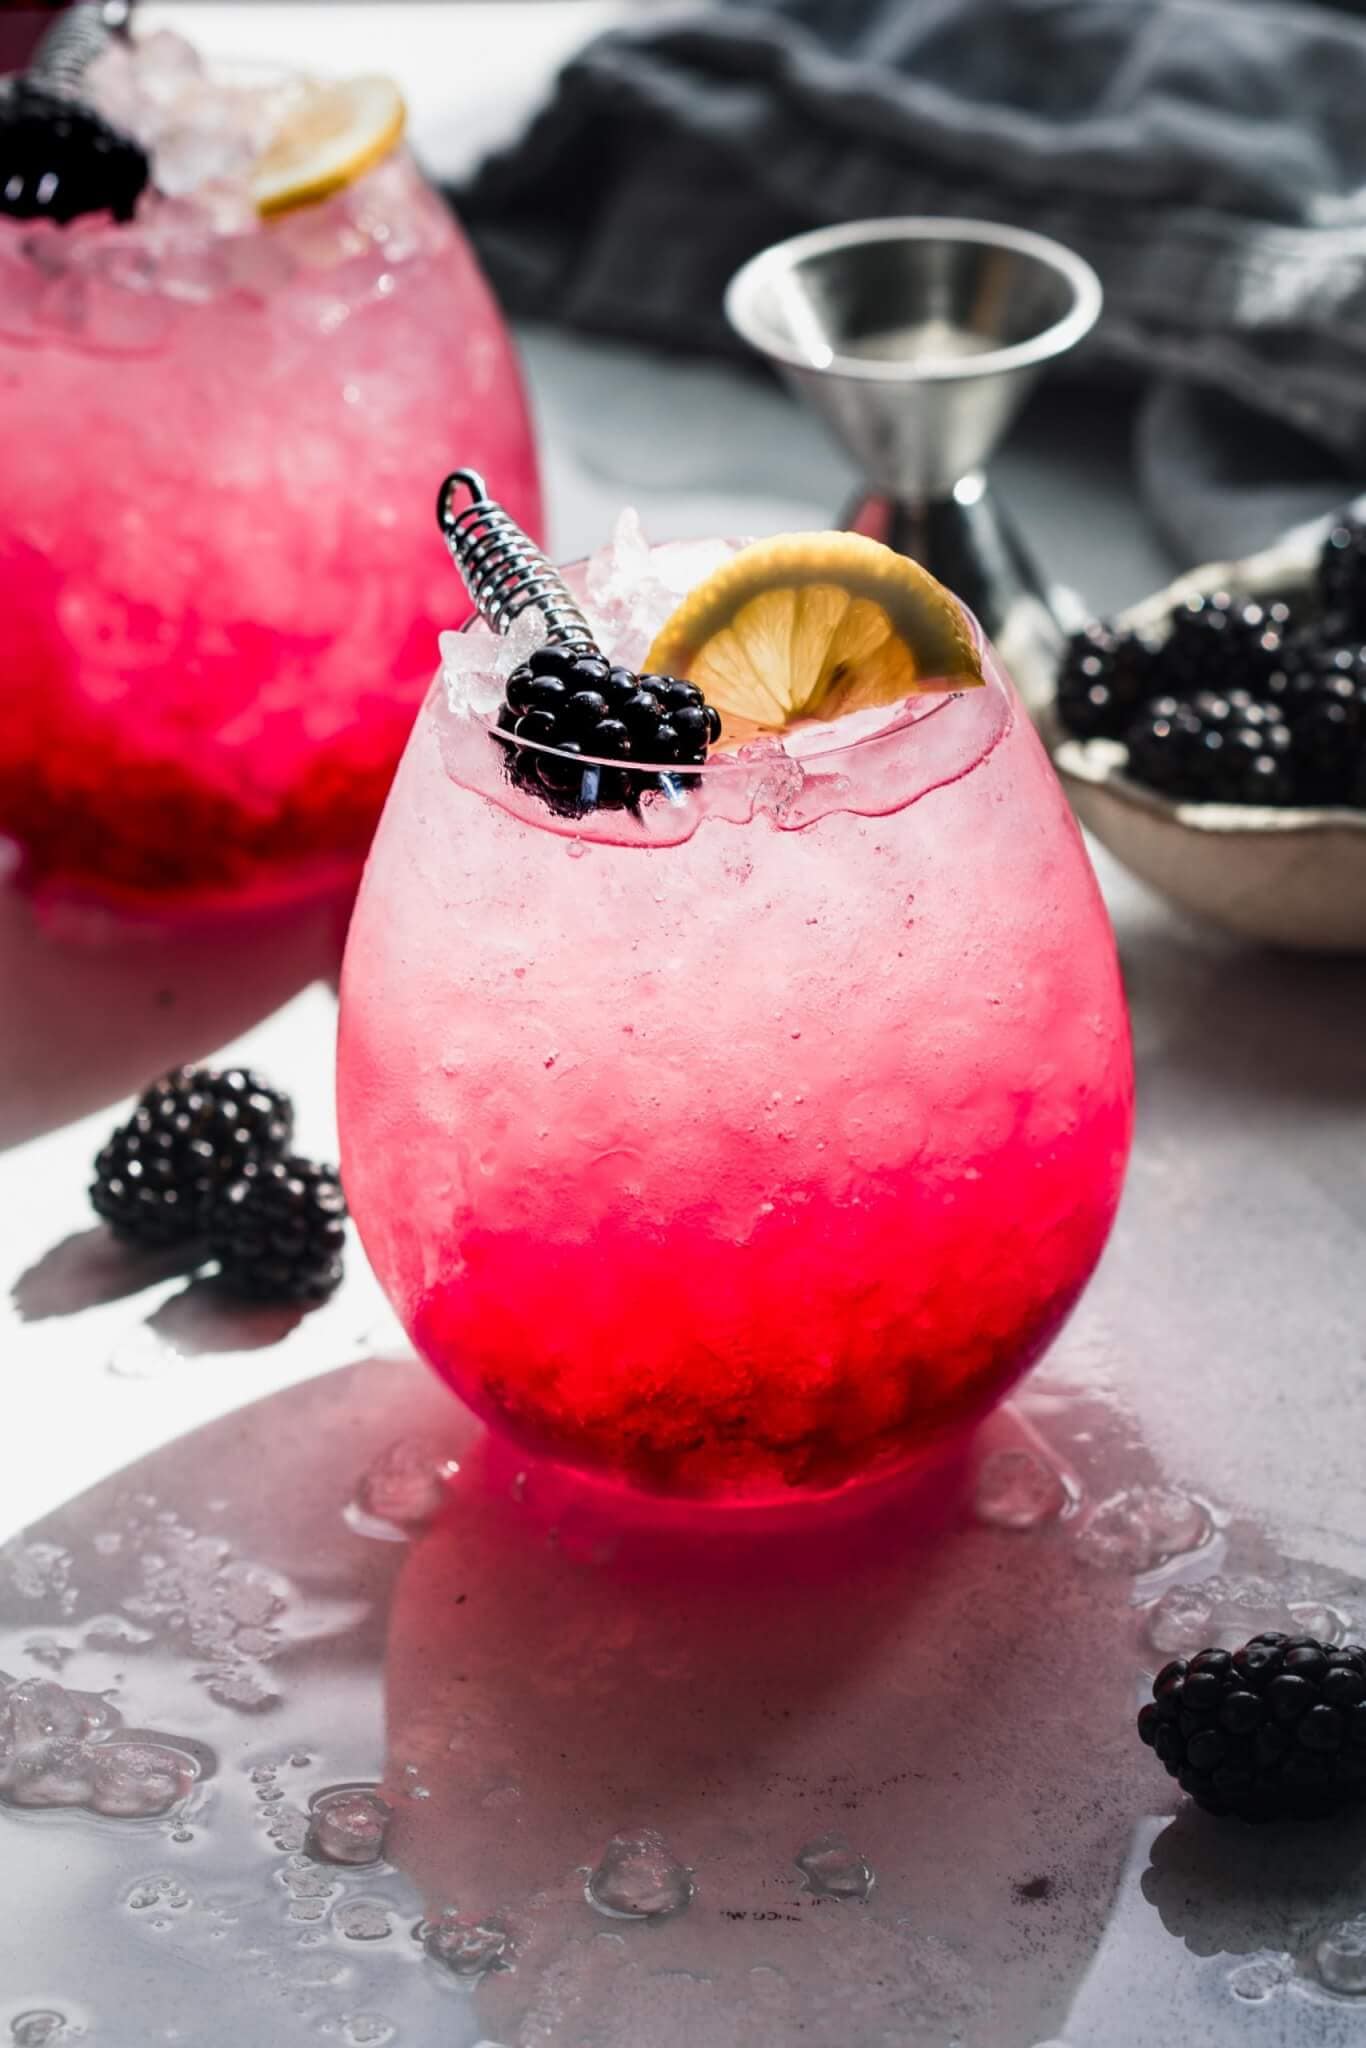 Side view of bramble cocktail garnished with lemon and blackberry.